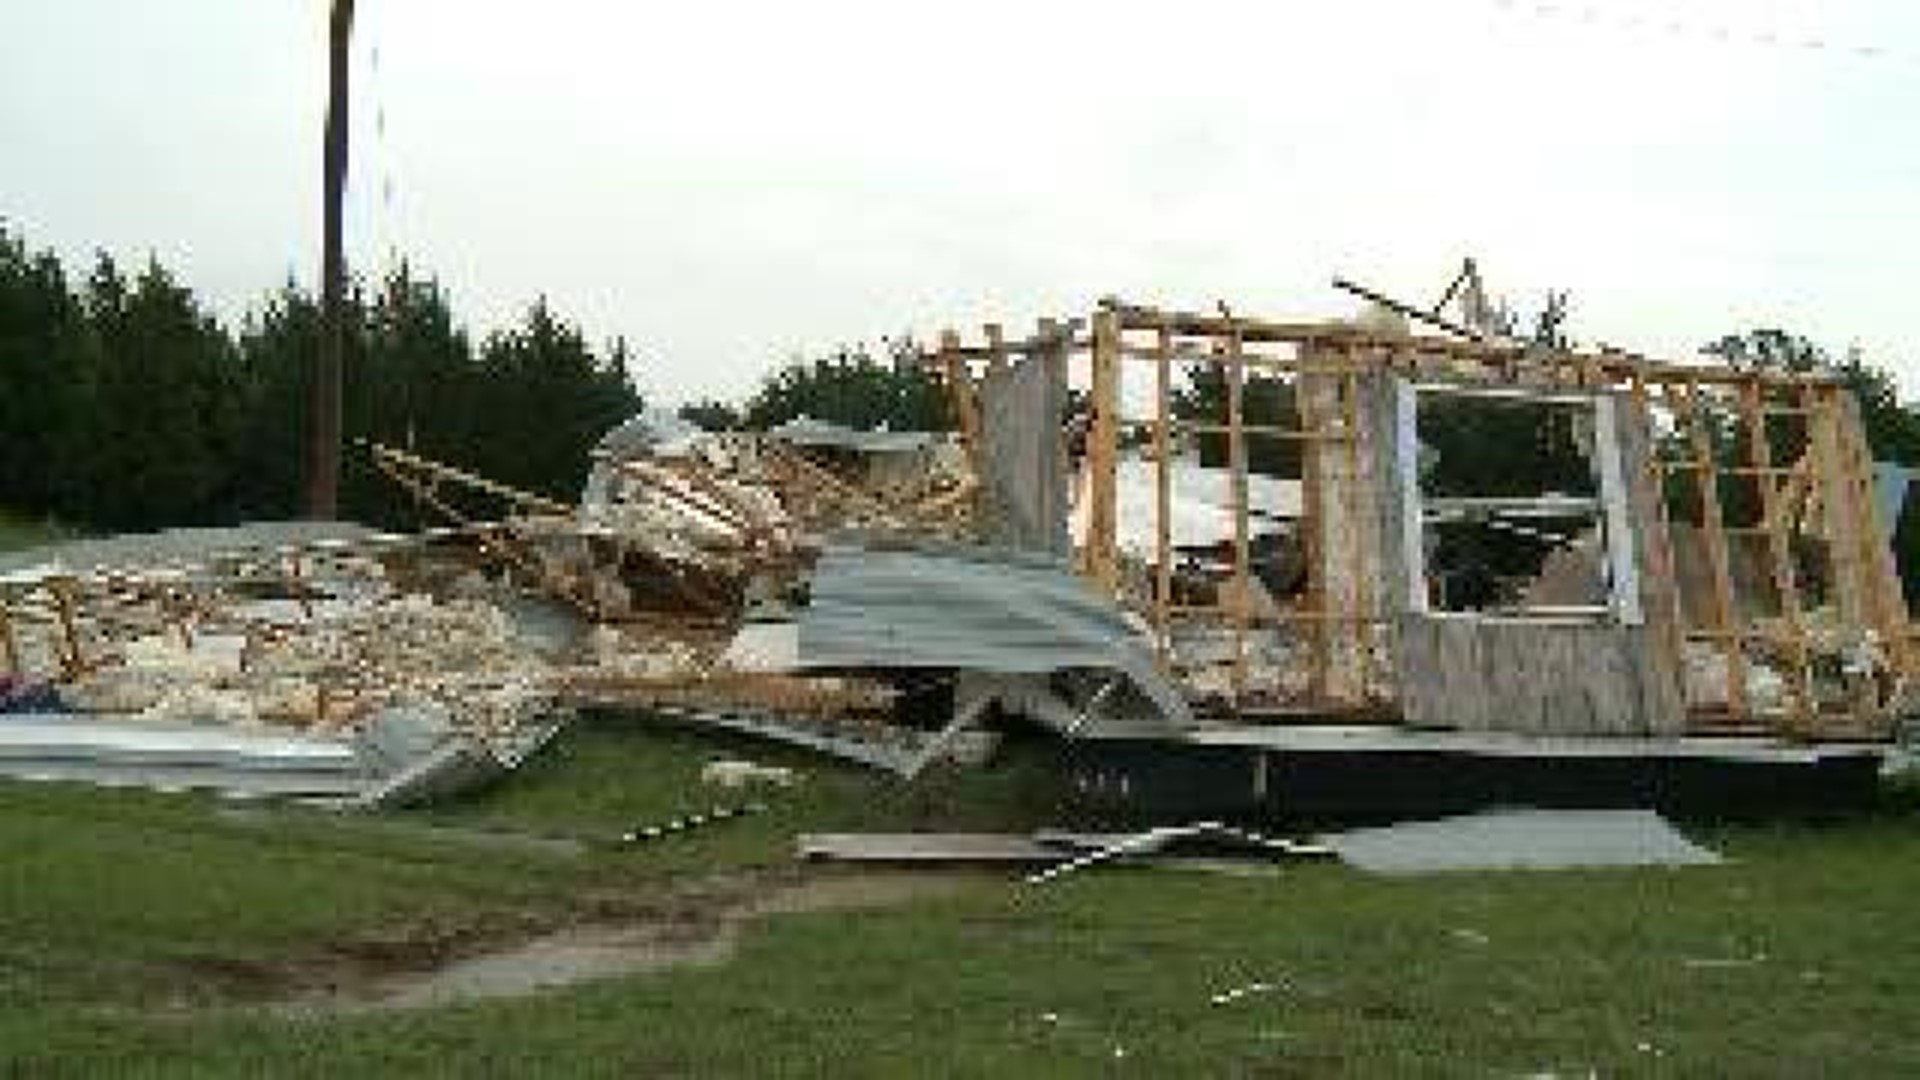 Cameron Mobile Home Destroyed